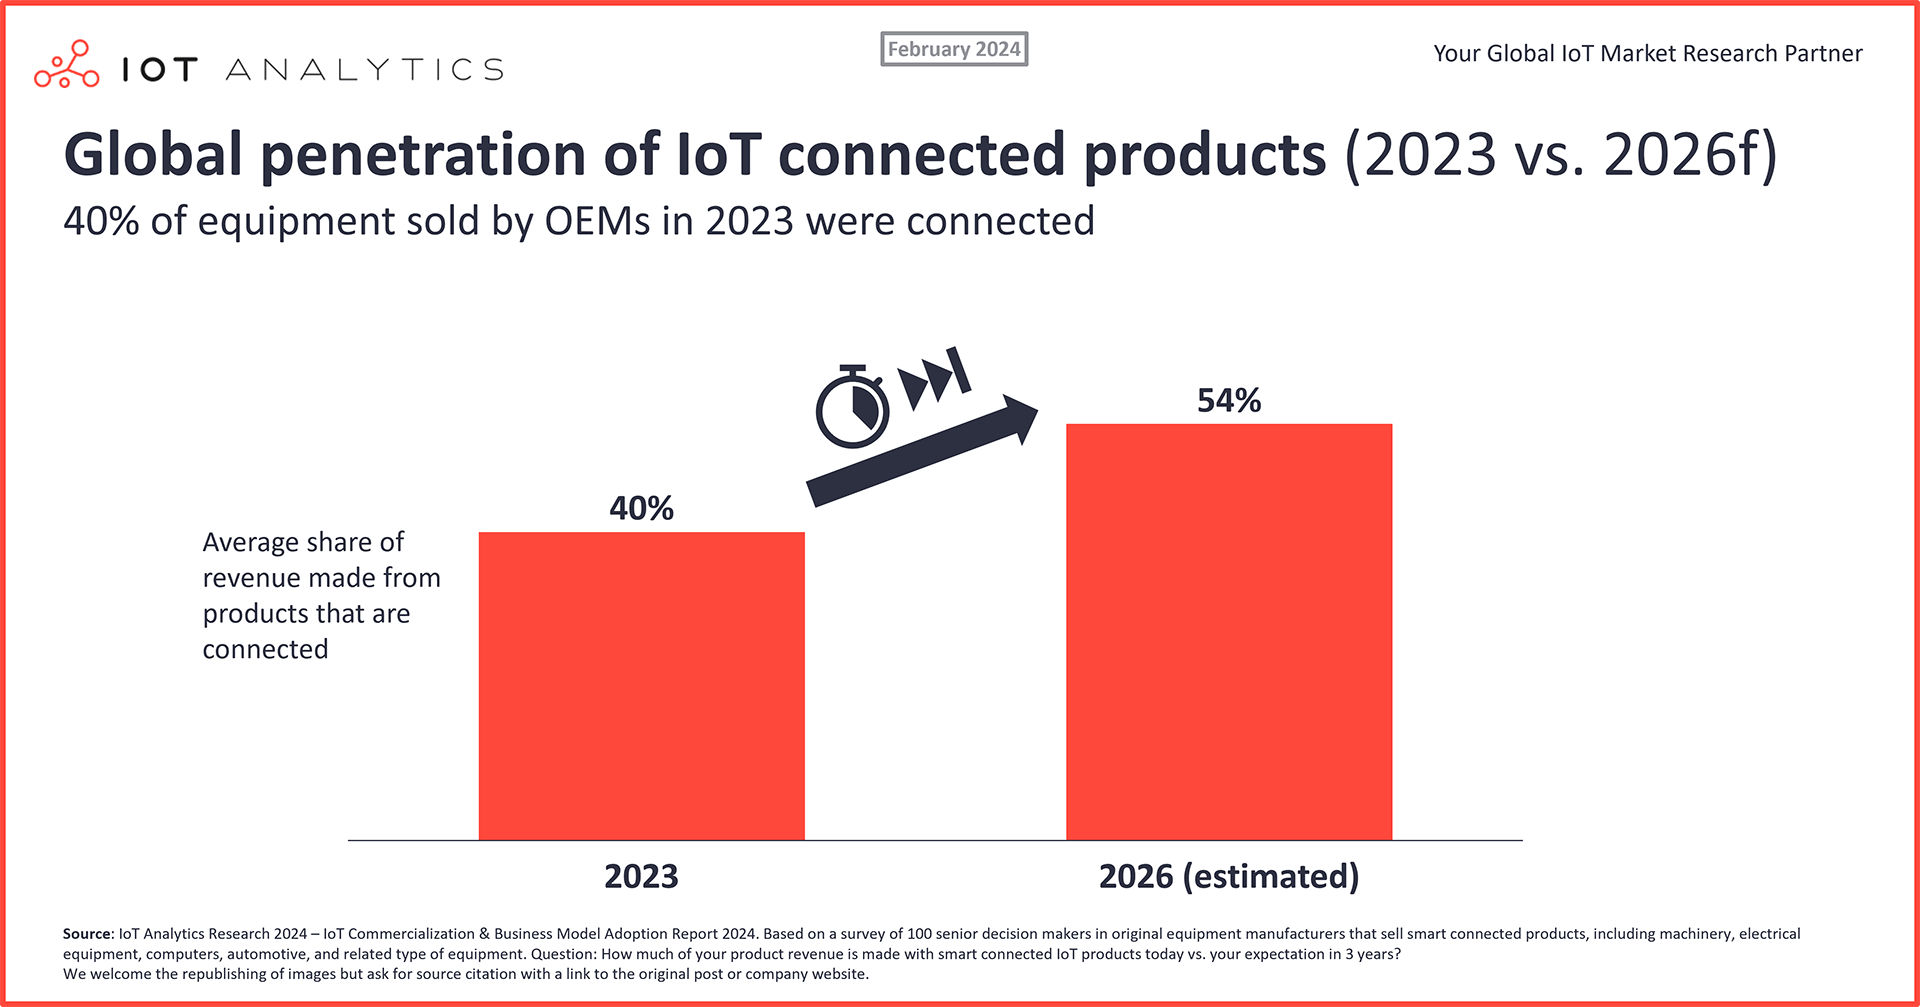 Global penetration of IoT connected products (2023 vs. 2026f)